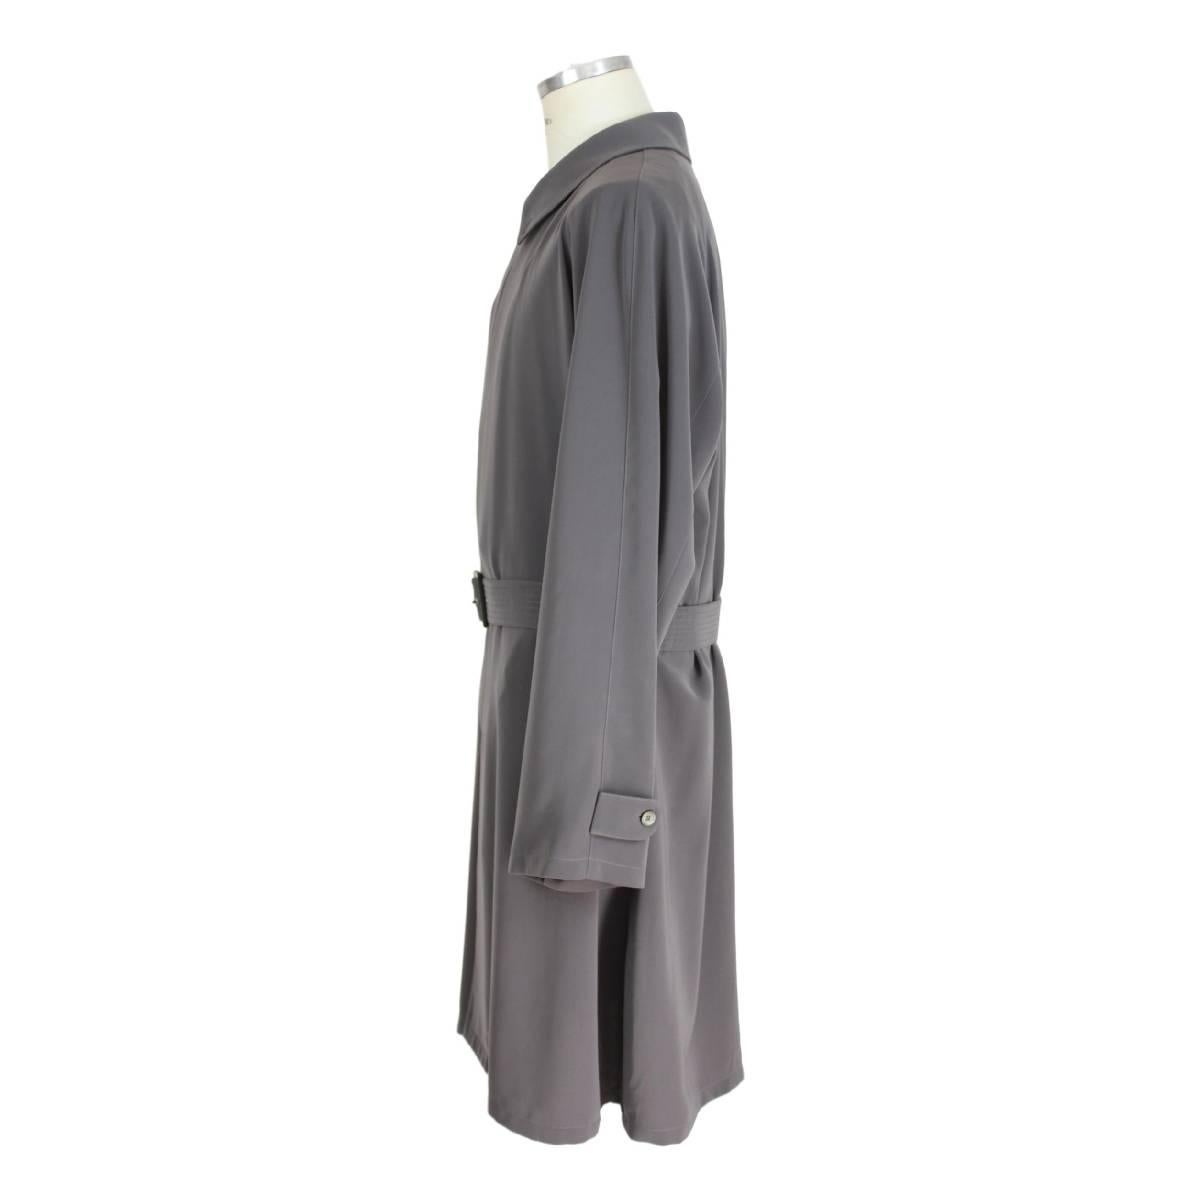 Giorgio Armani vintage trench coat, gray pearl. Long and light with waist belt. Rare label of the 1980s, Classic Milano Borgonuovo 21. Pure elegance. Made in italy, size 56, excellent conditions

Size: 56 It 46 UK / Us

Shoulder: 56 cm
Armpit to